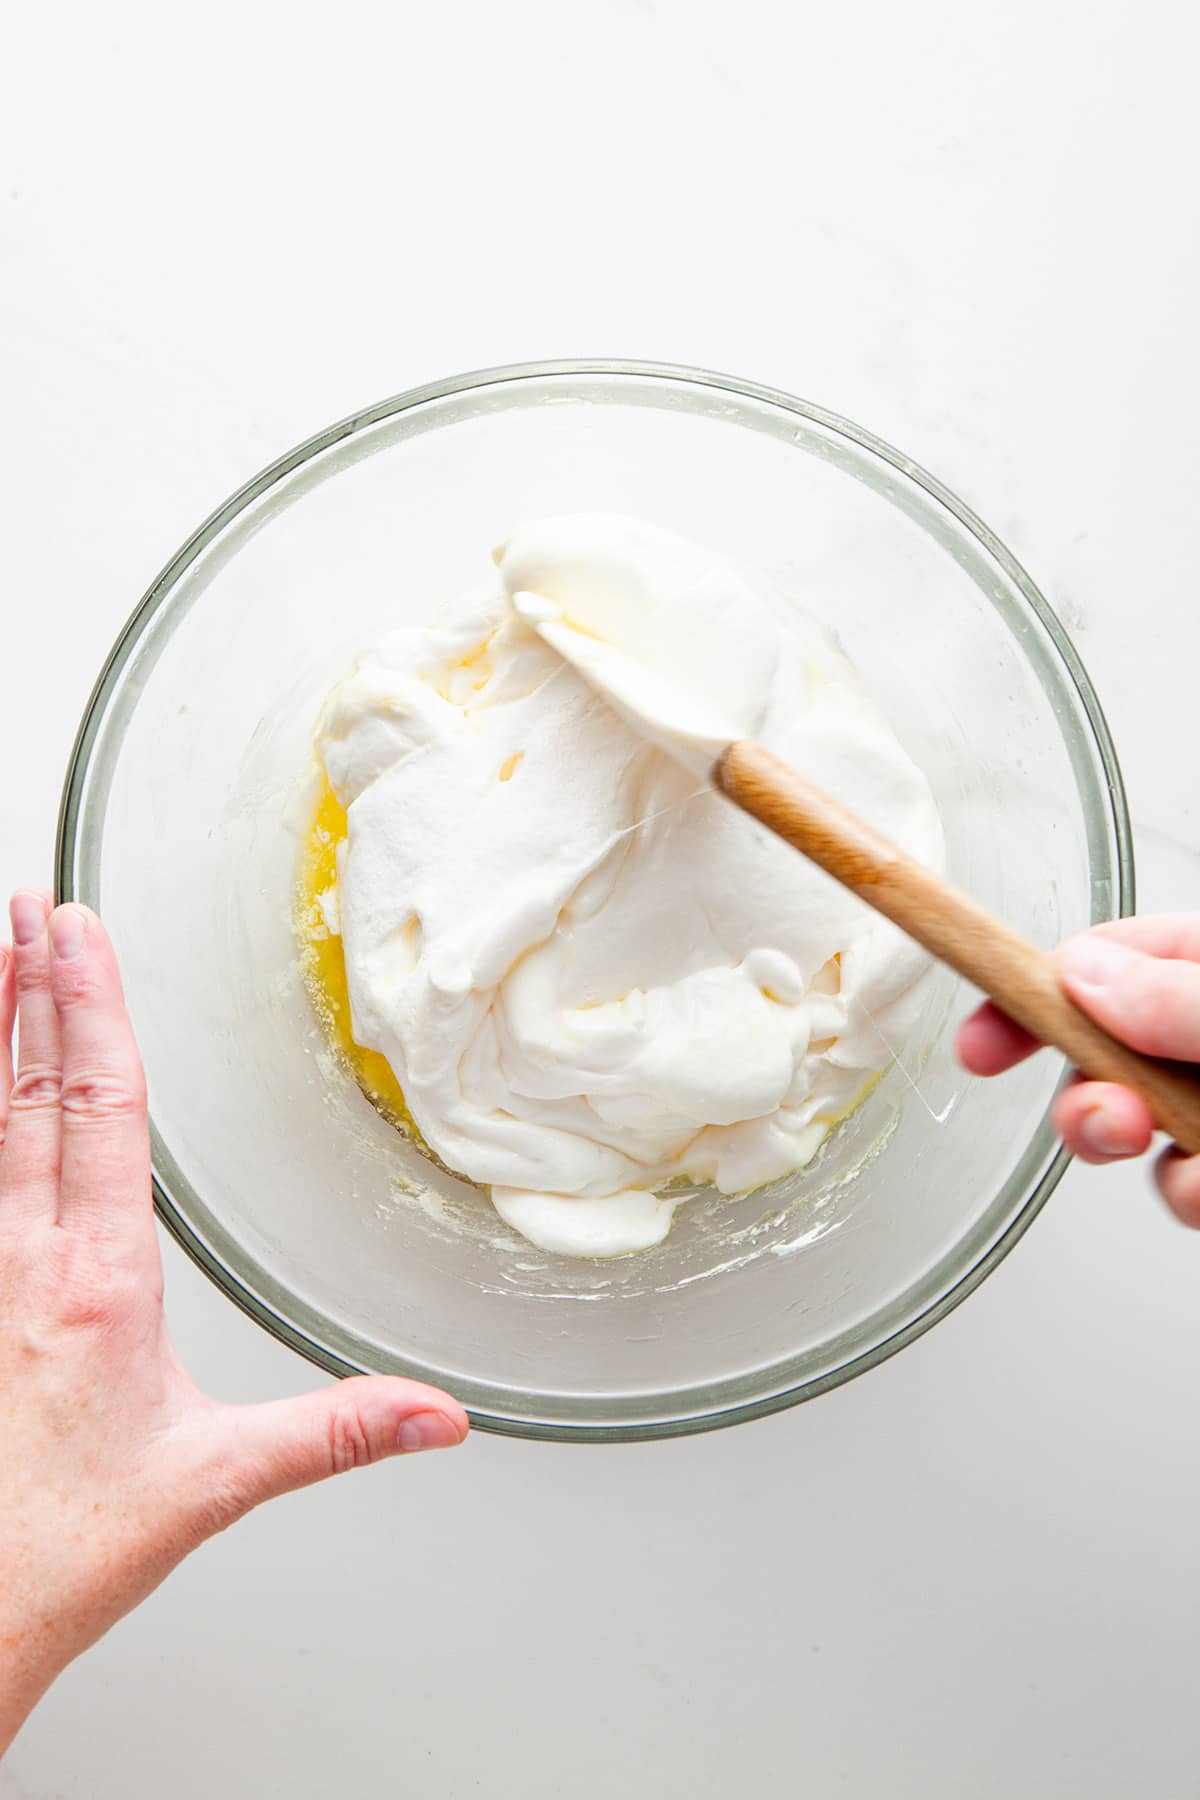 A hand stirring melted marshmallow and butter in a glass bowl with a rubber spatula.